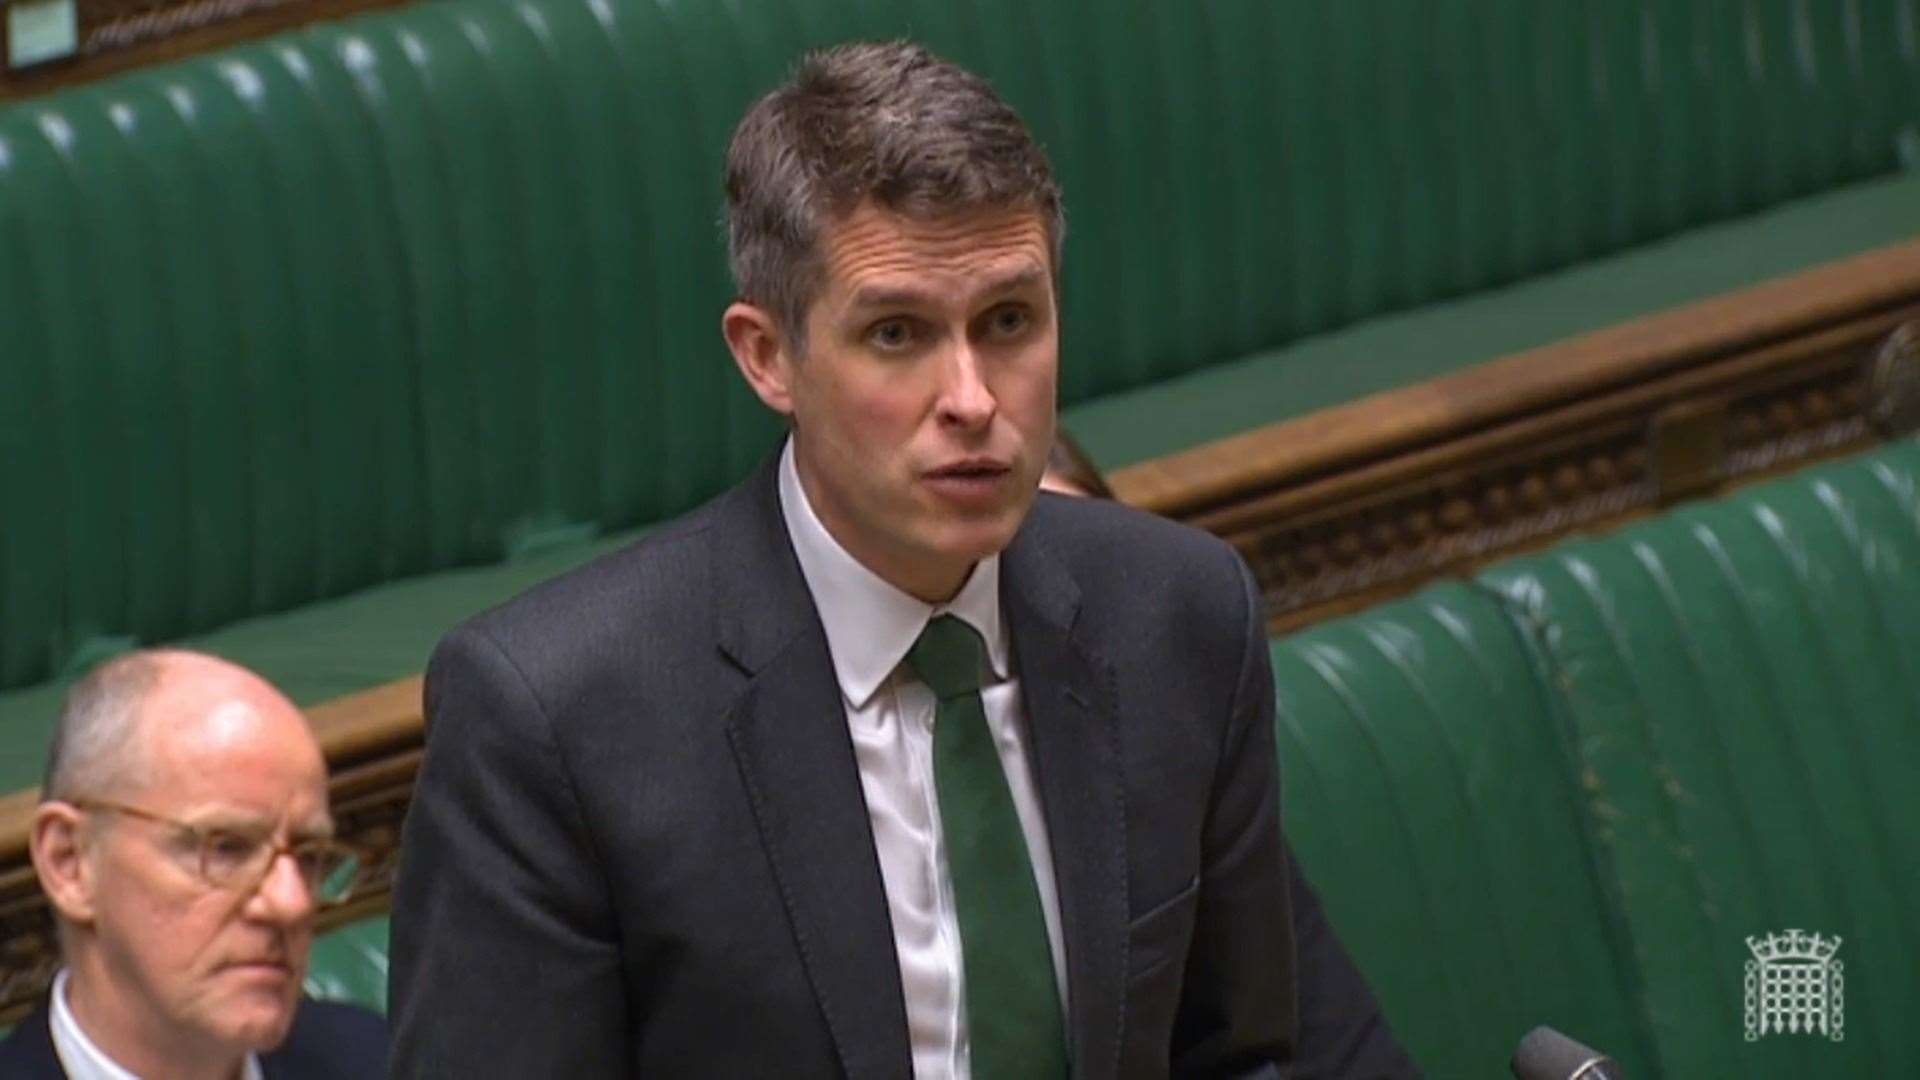 Education Secretary Gavin Williamson hopes the new arrangements for schools will keep more children in lessons